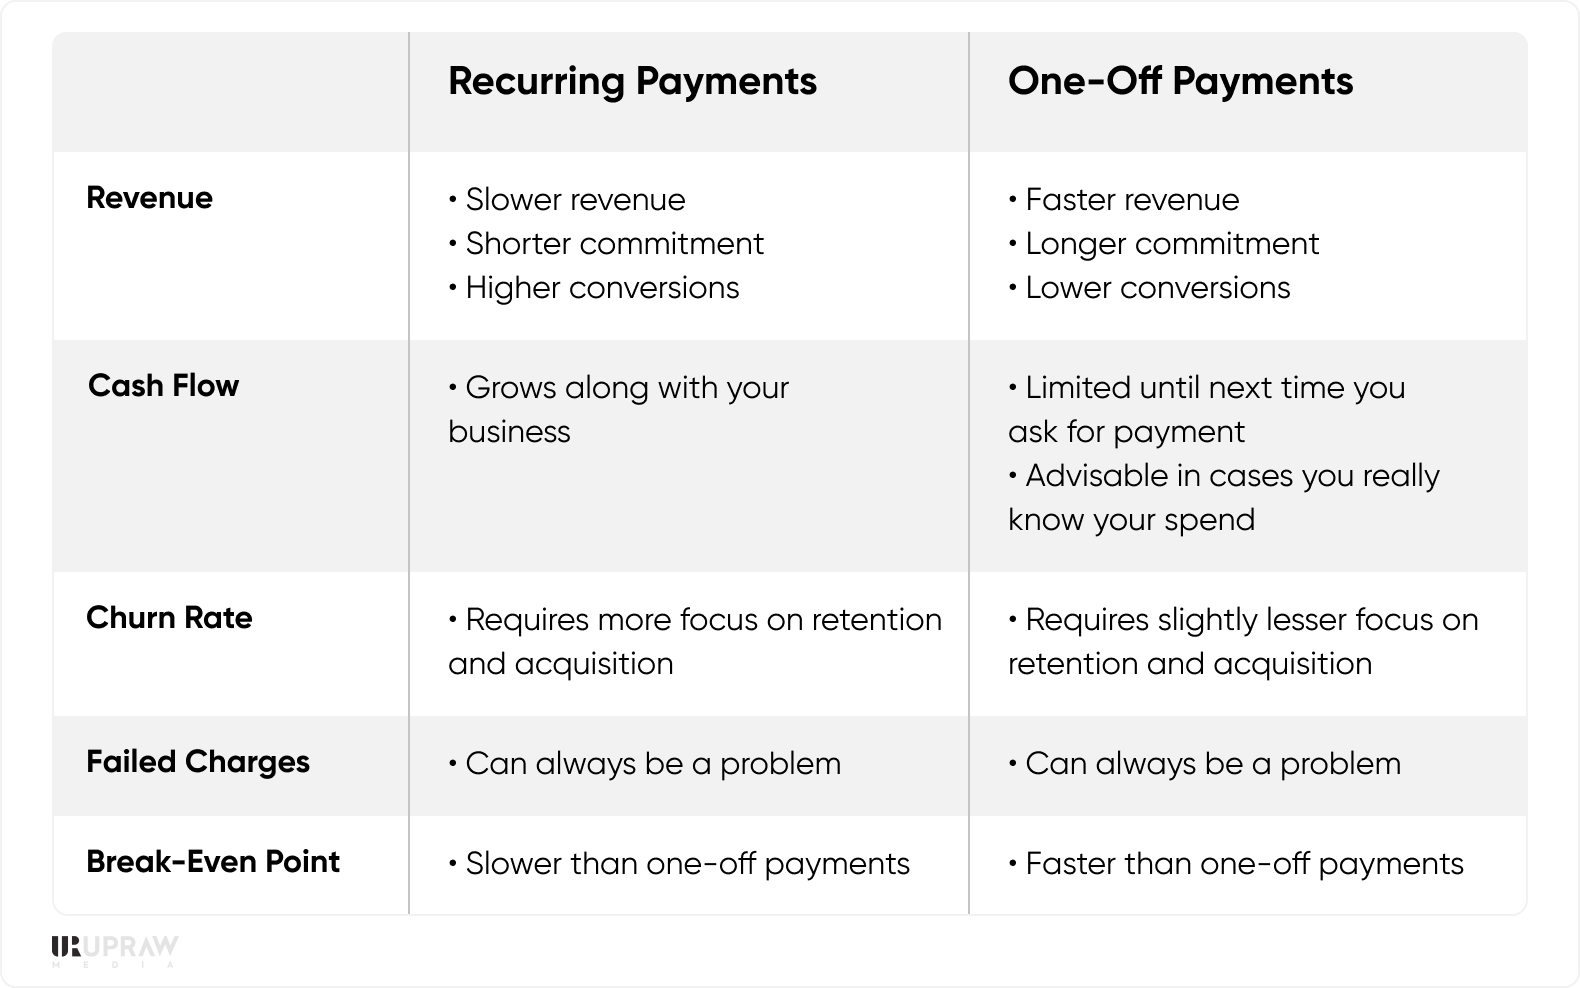 Recurring vs One-Off payments